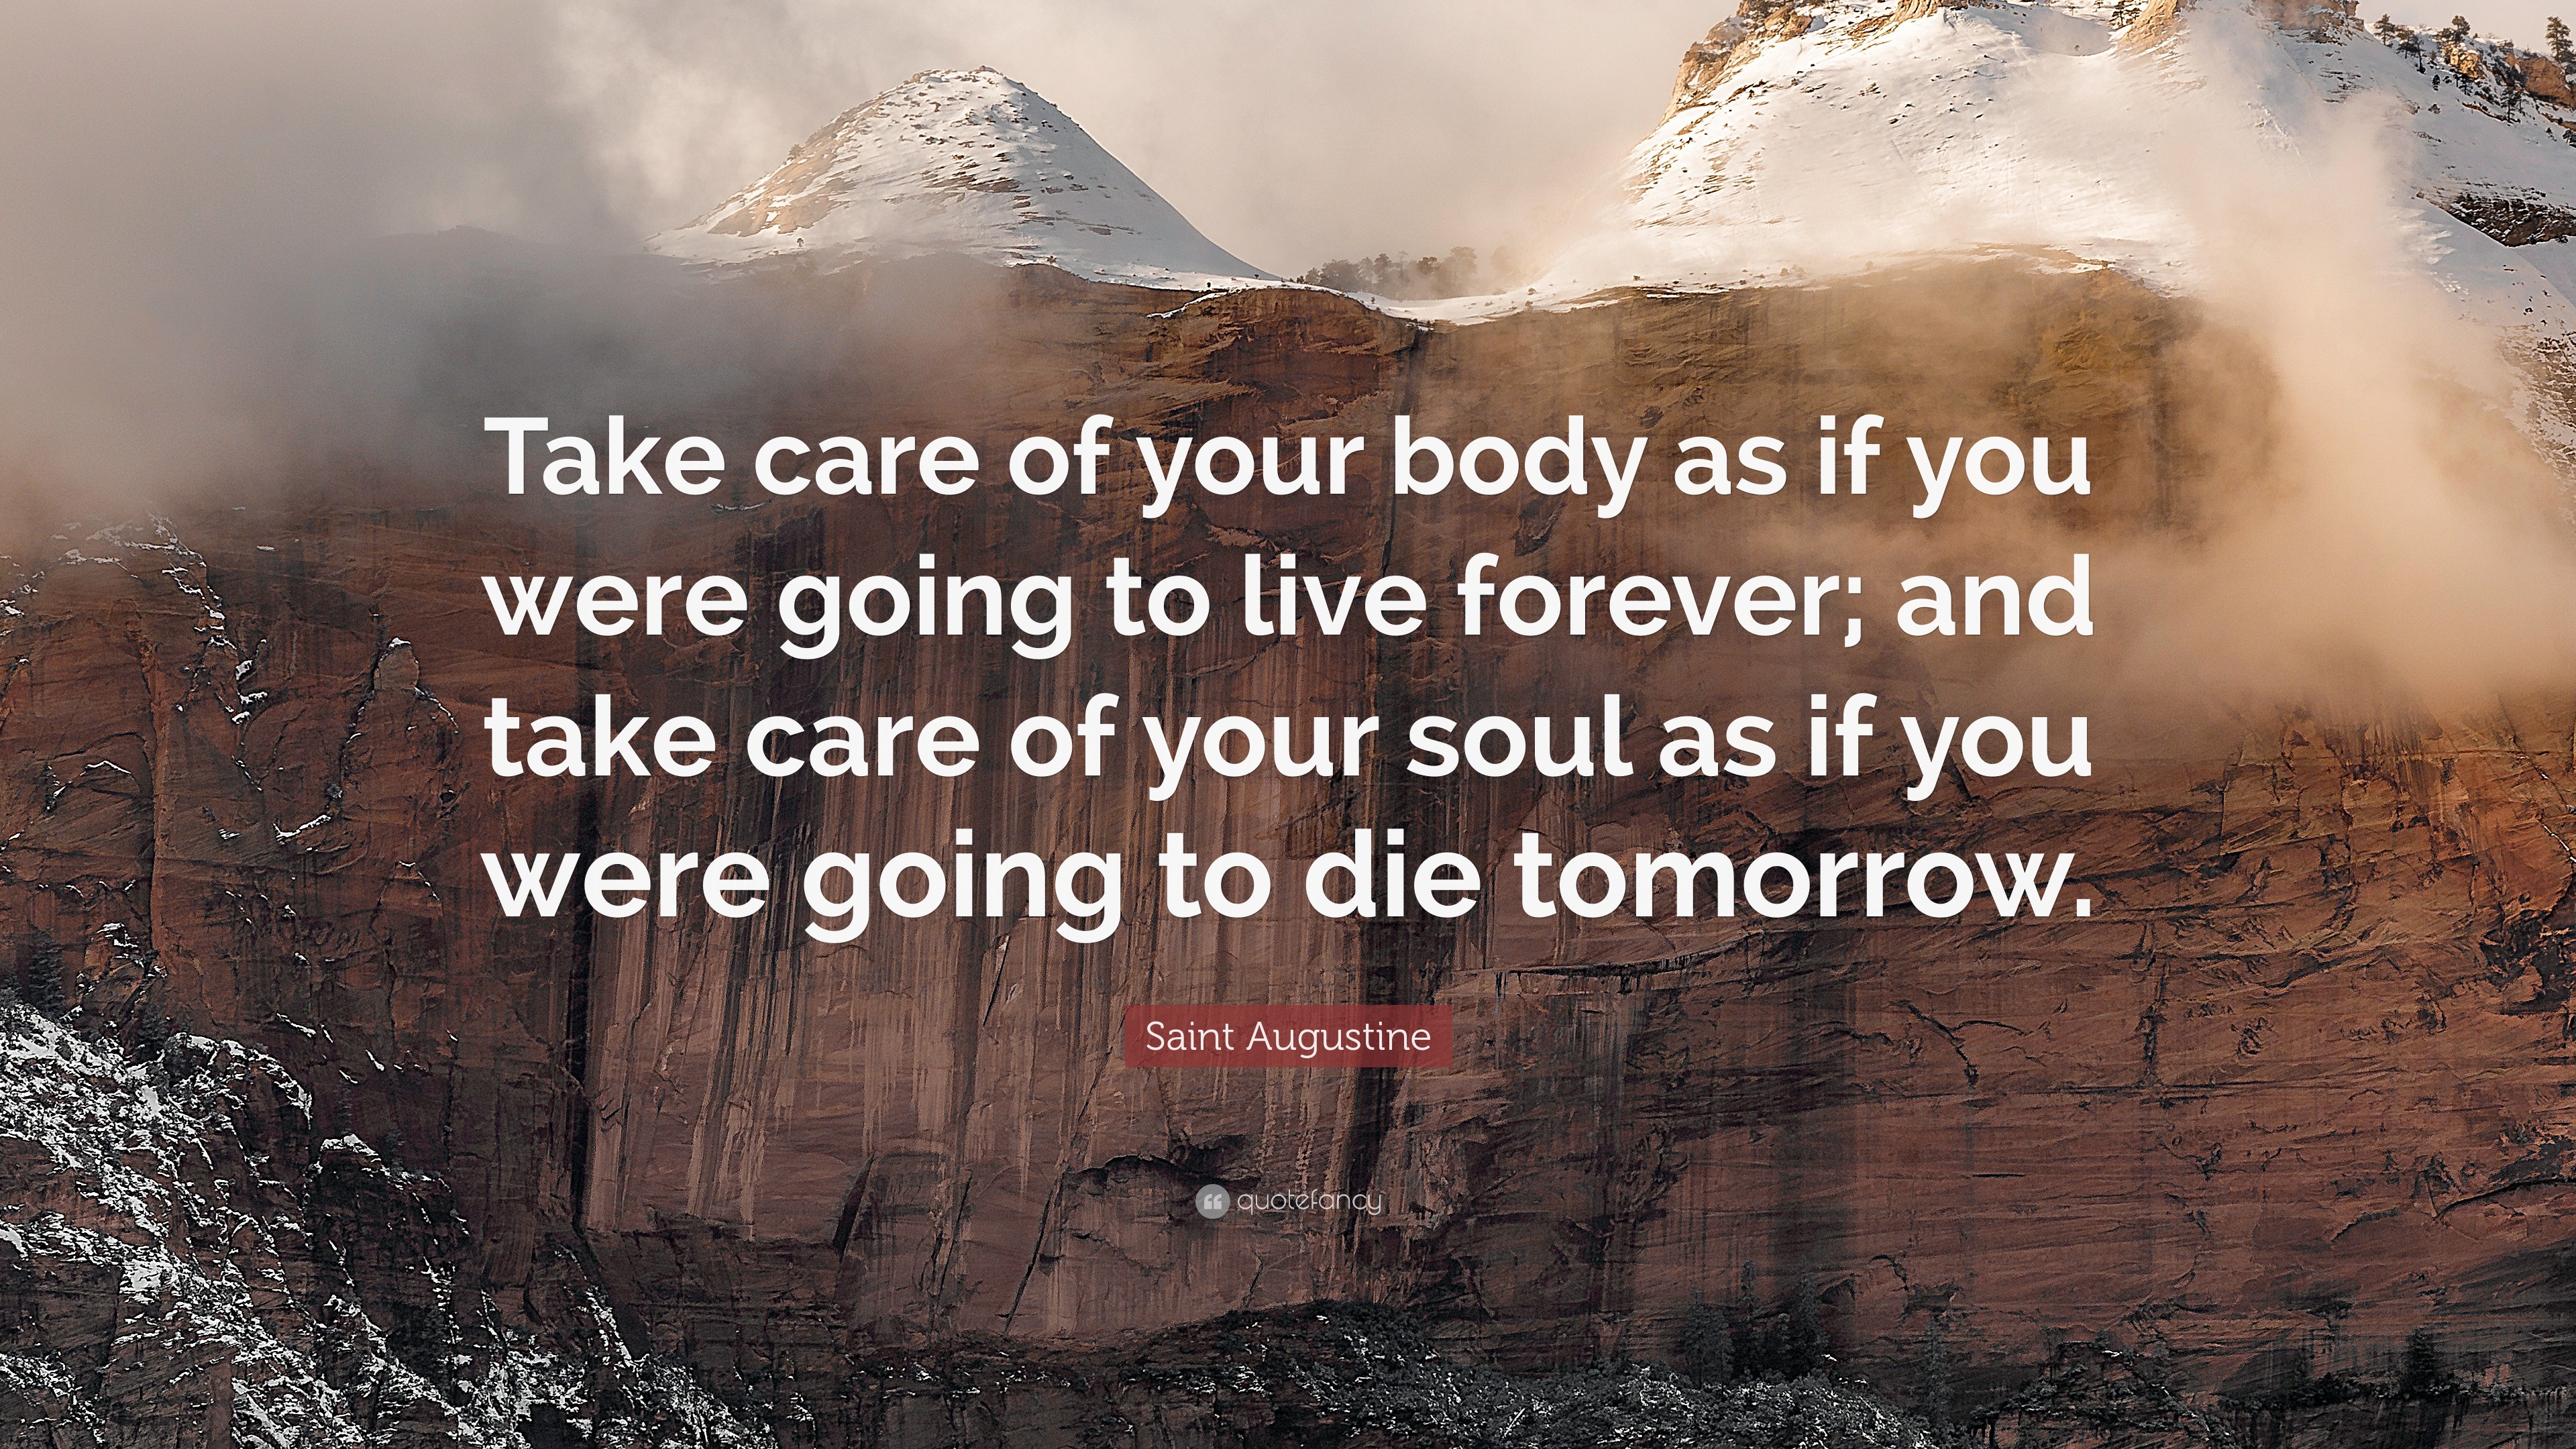 Saint Augustine Quote Take Care Of Your Body As If You Were Going To Live Forever And Take Care Of Your Soul As If You Were Going To Die Tomo